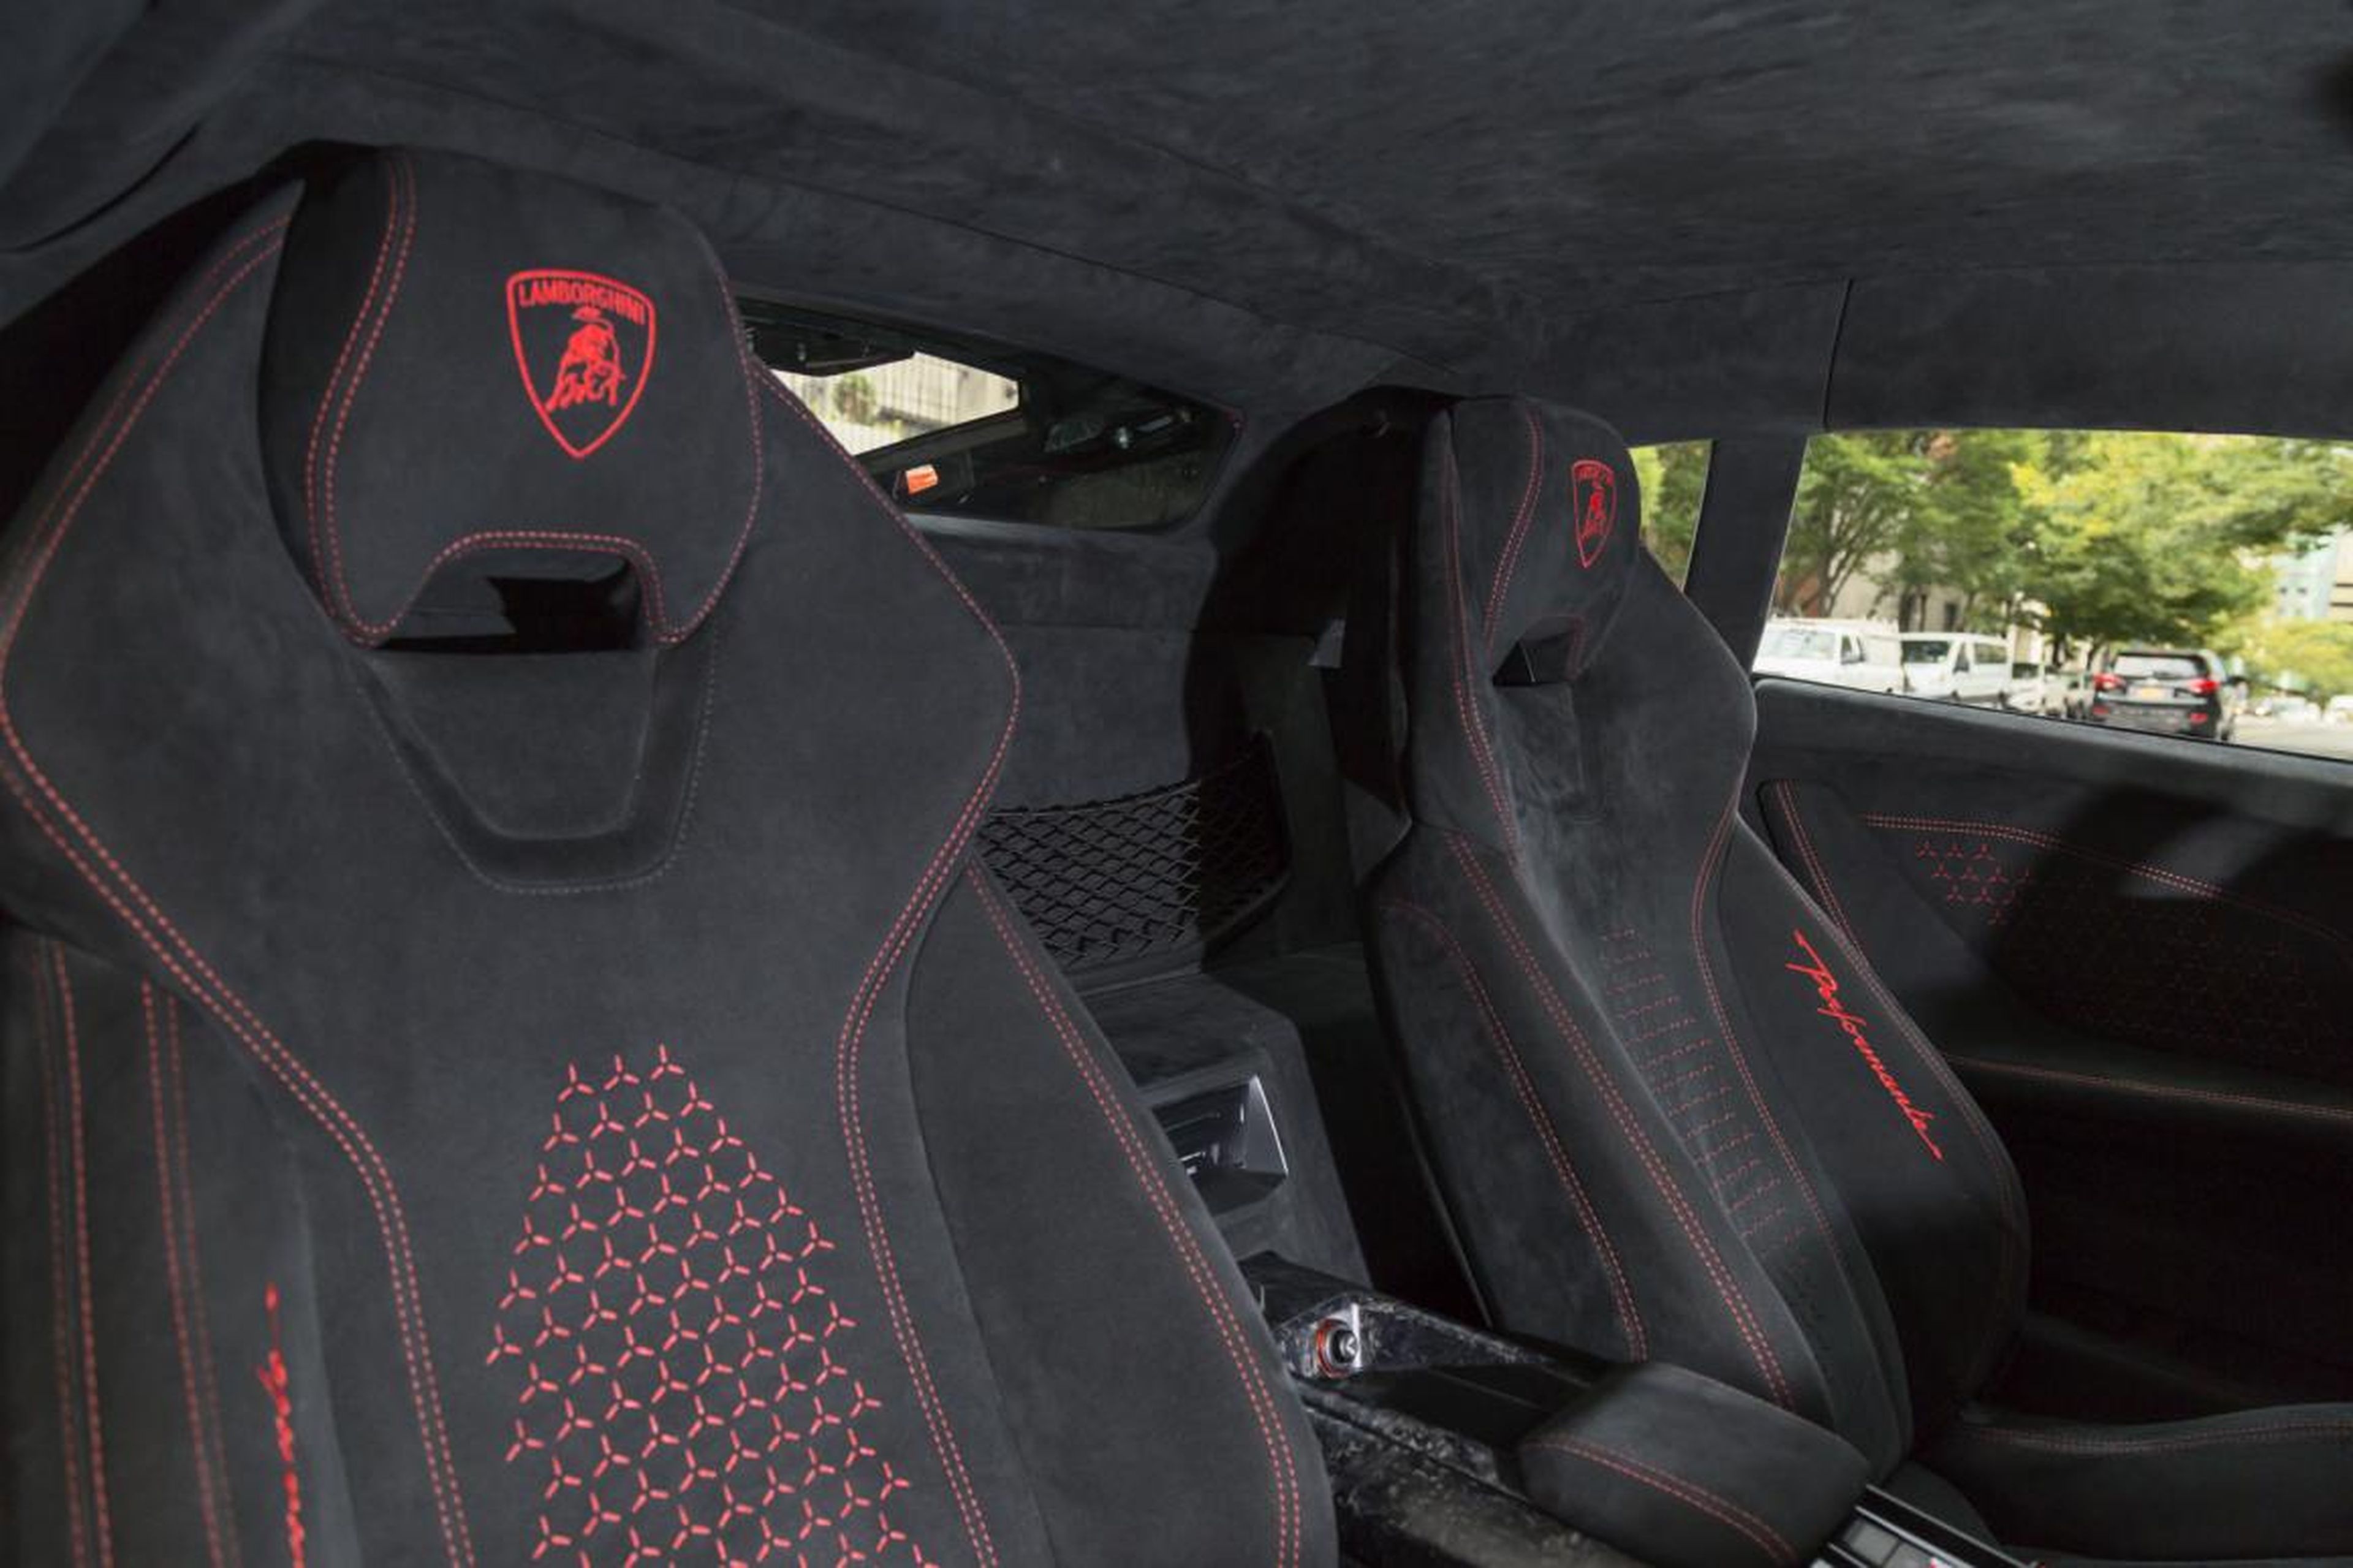 The red Lambo badging and stitching adds some flash to the otherwise monotonous "Nero Cosmus" interior.